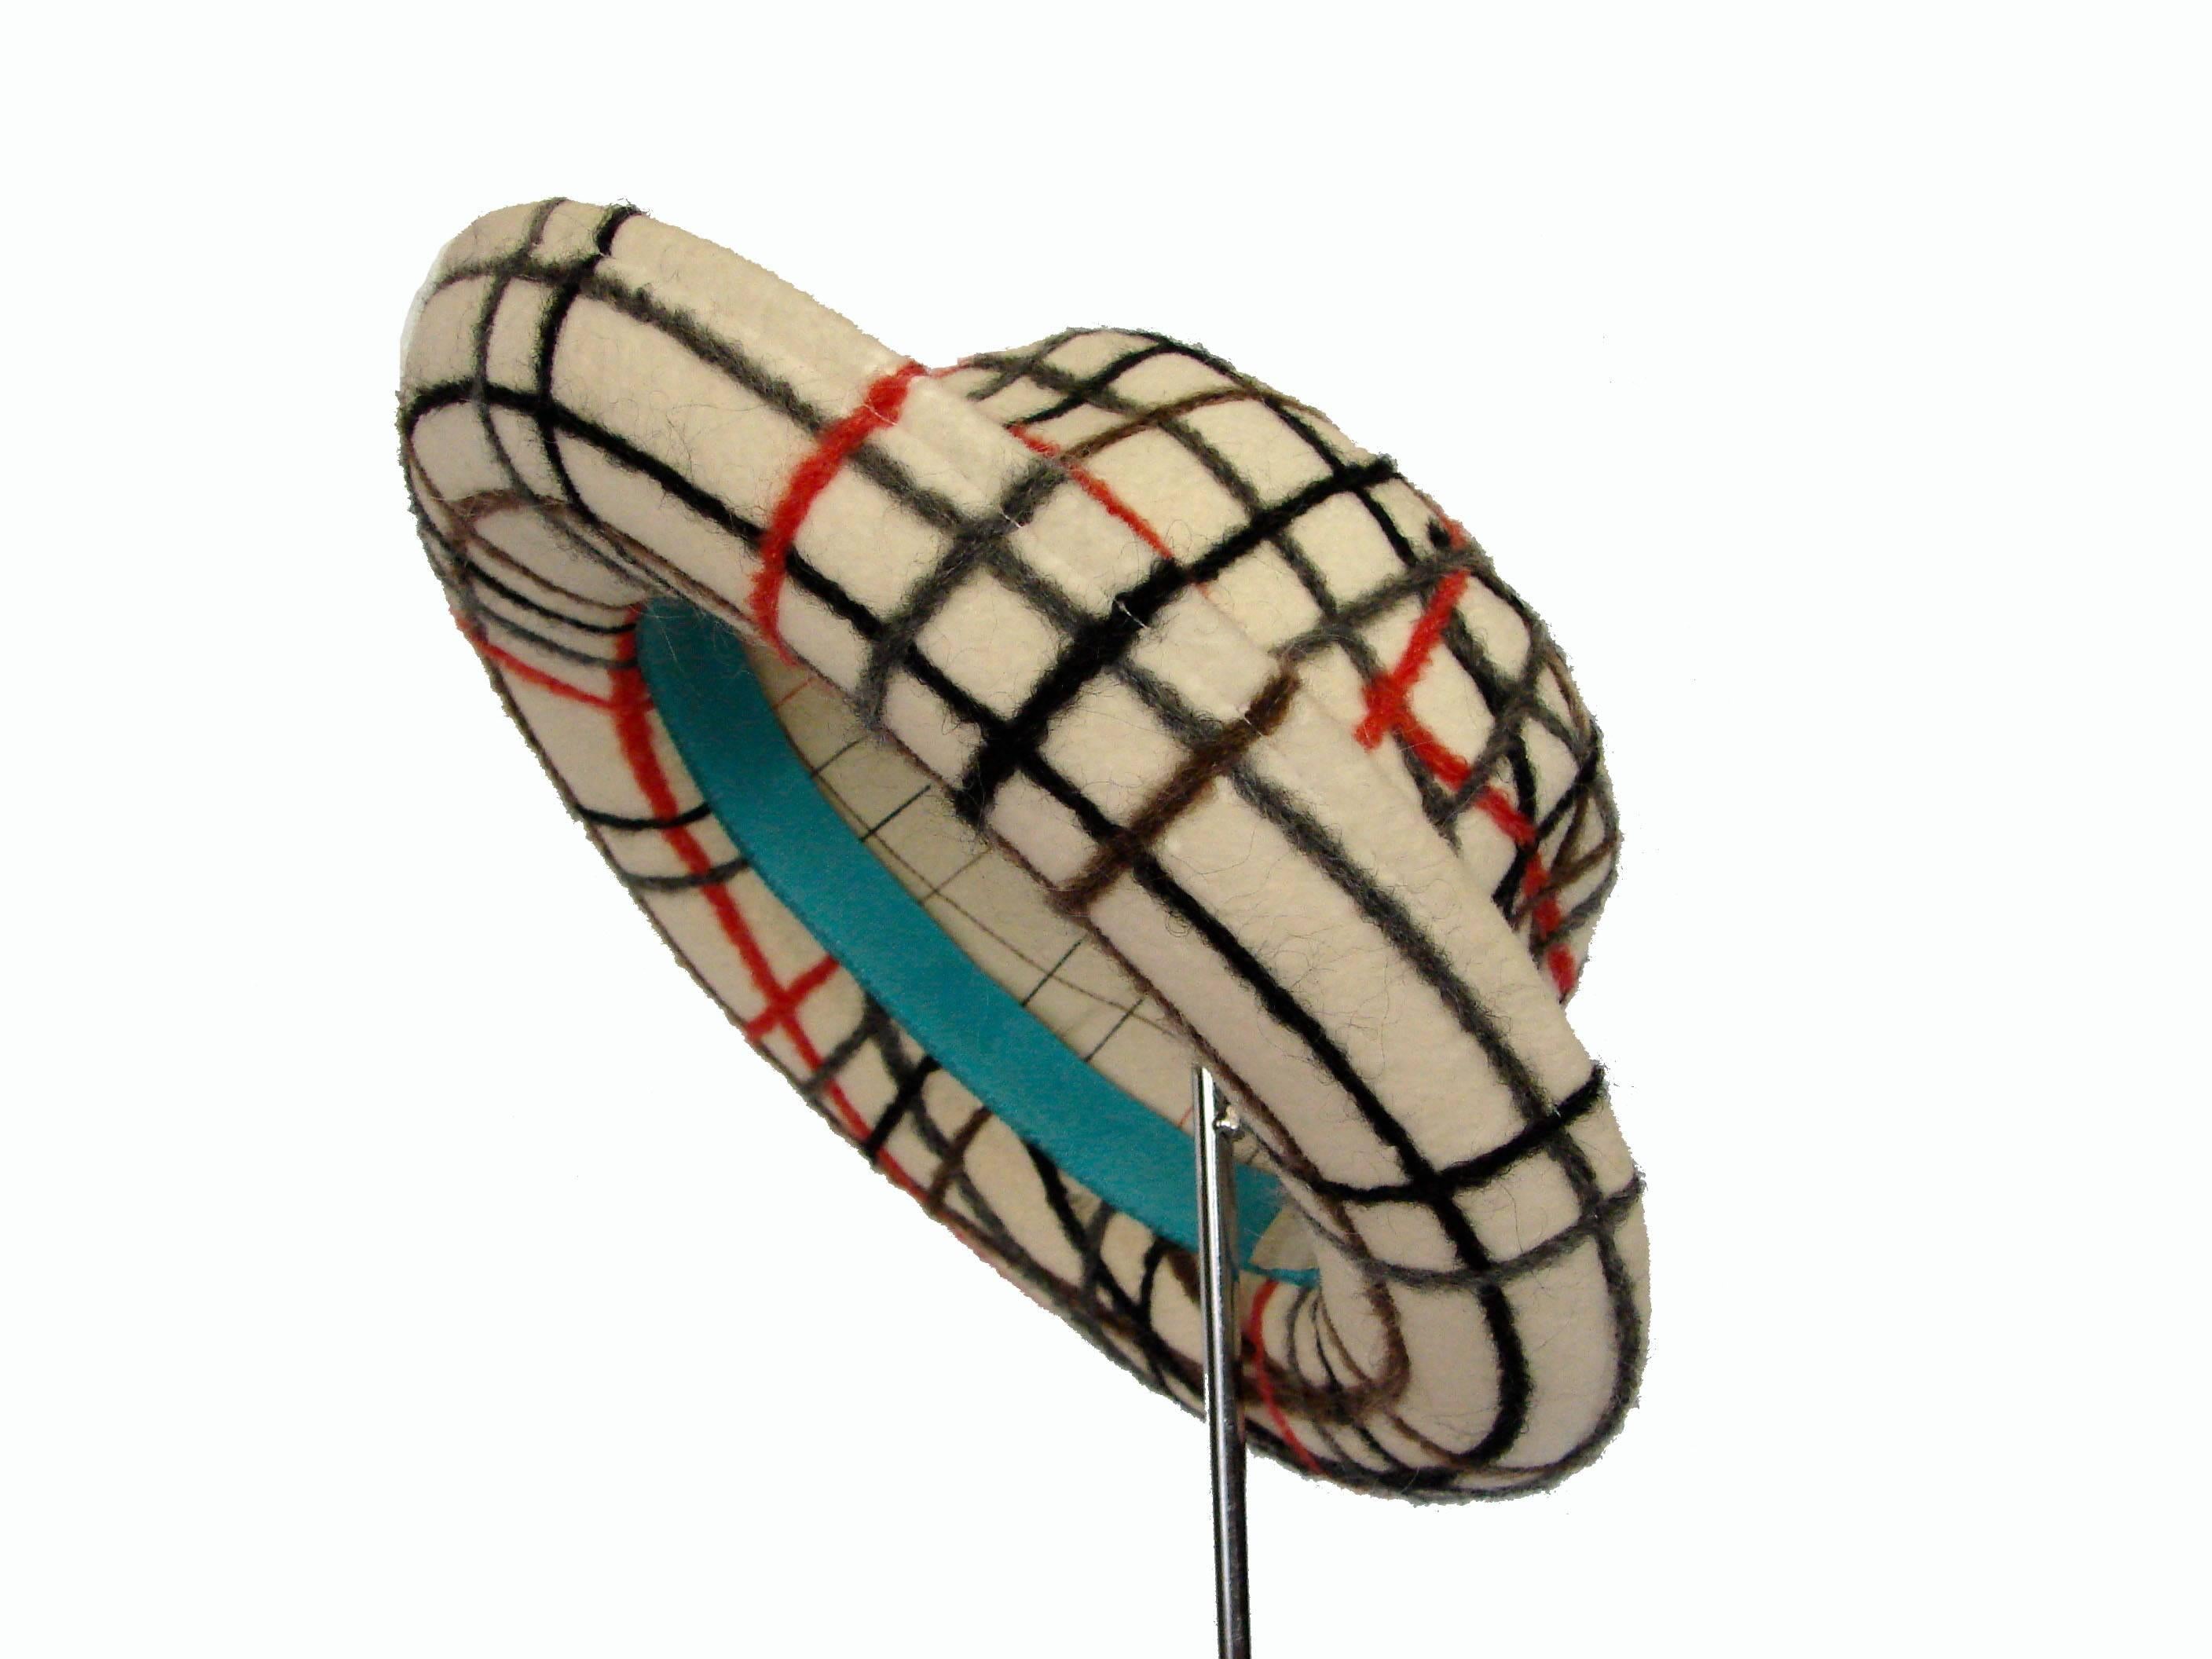 Yves Saint Laurent Cream Felt Wool Hat with Abstract Spiral Design Rare 1970s  2